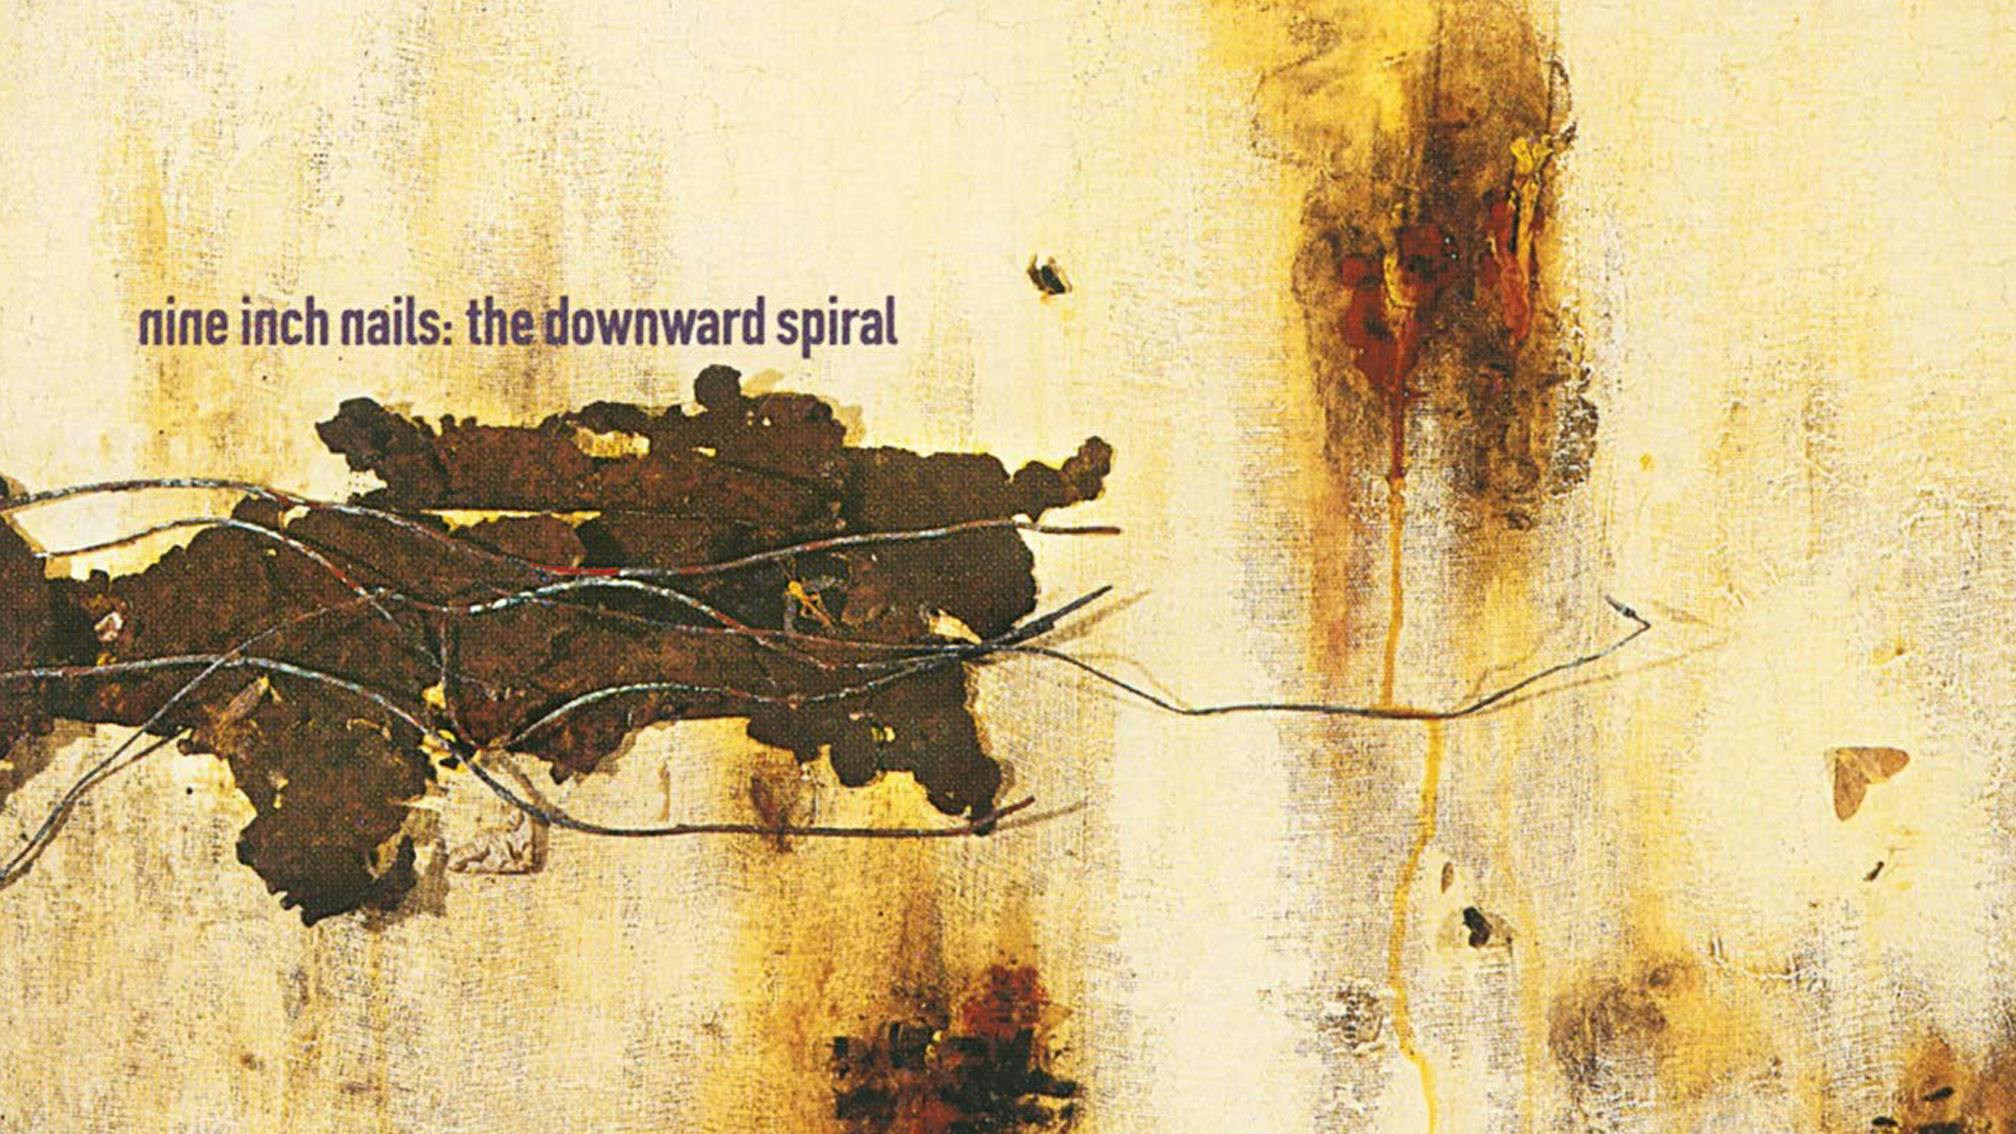 The Downward Spiral: The darkness and despair behind Nine Inch Nails' masterpiece